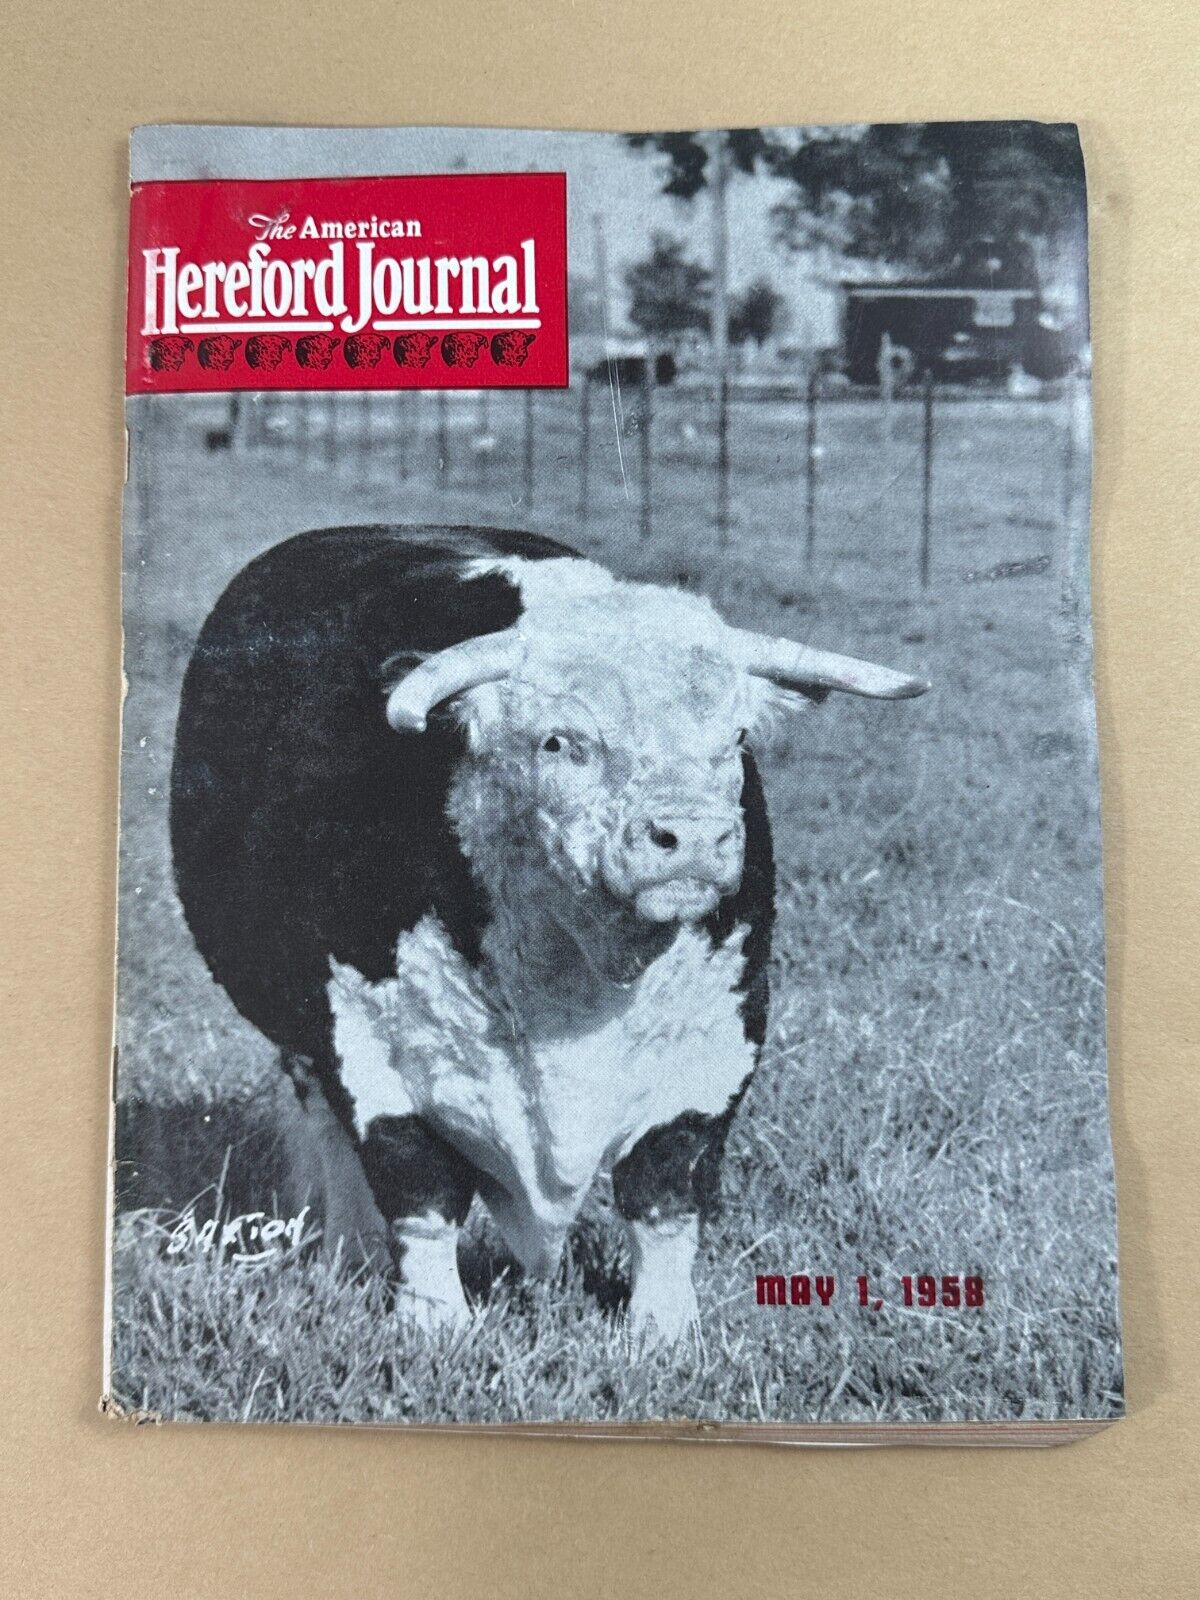 May 1, 1958 American Hereford Journal magazine - ads, articles, photos, etc